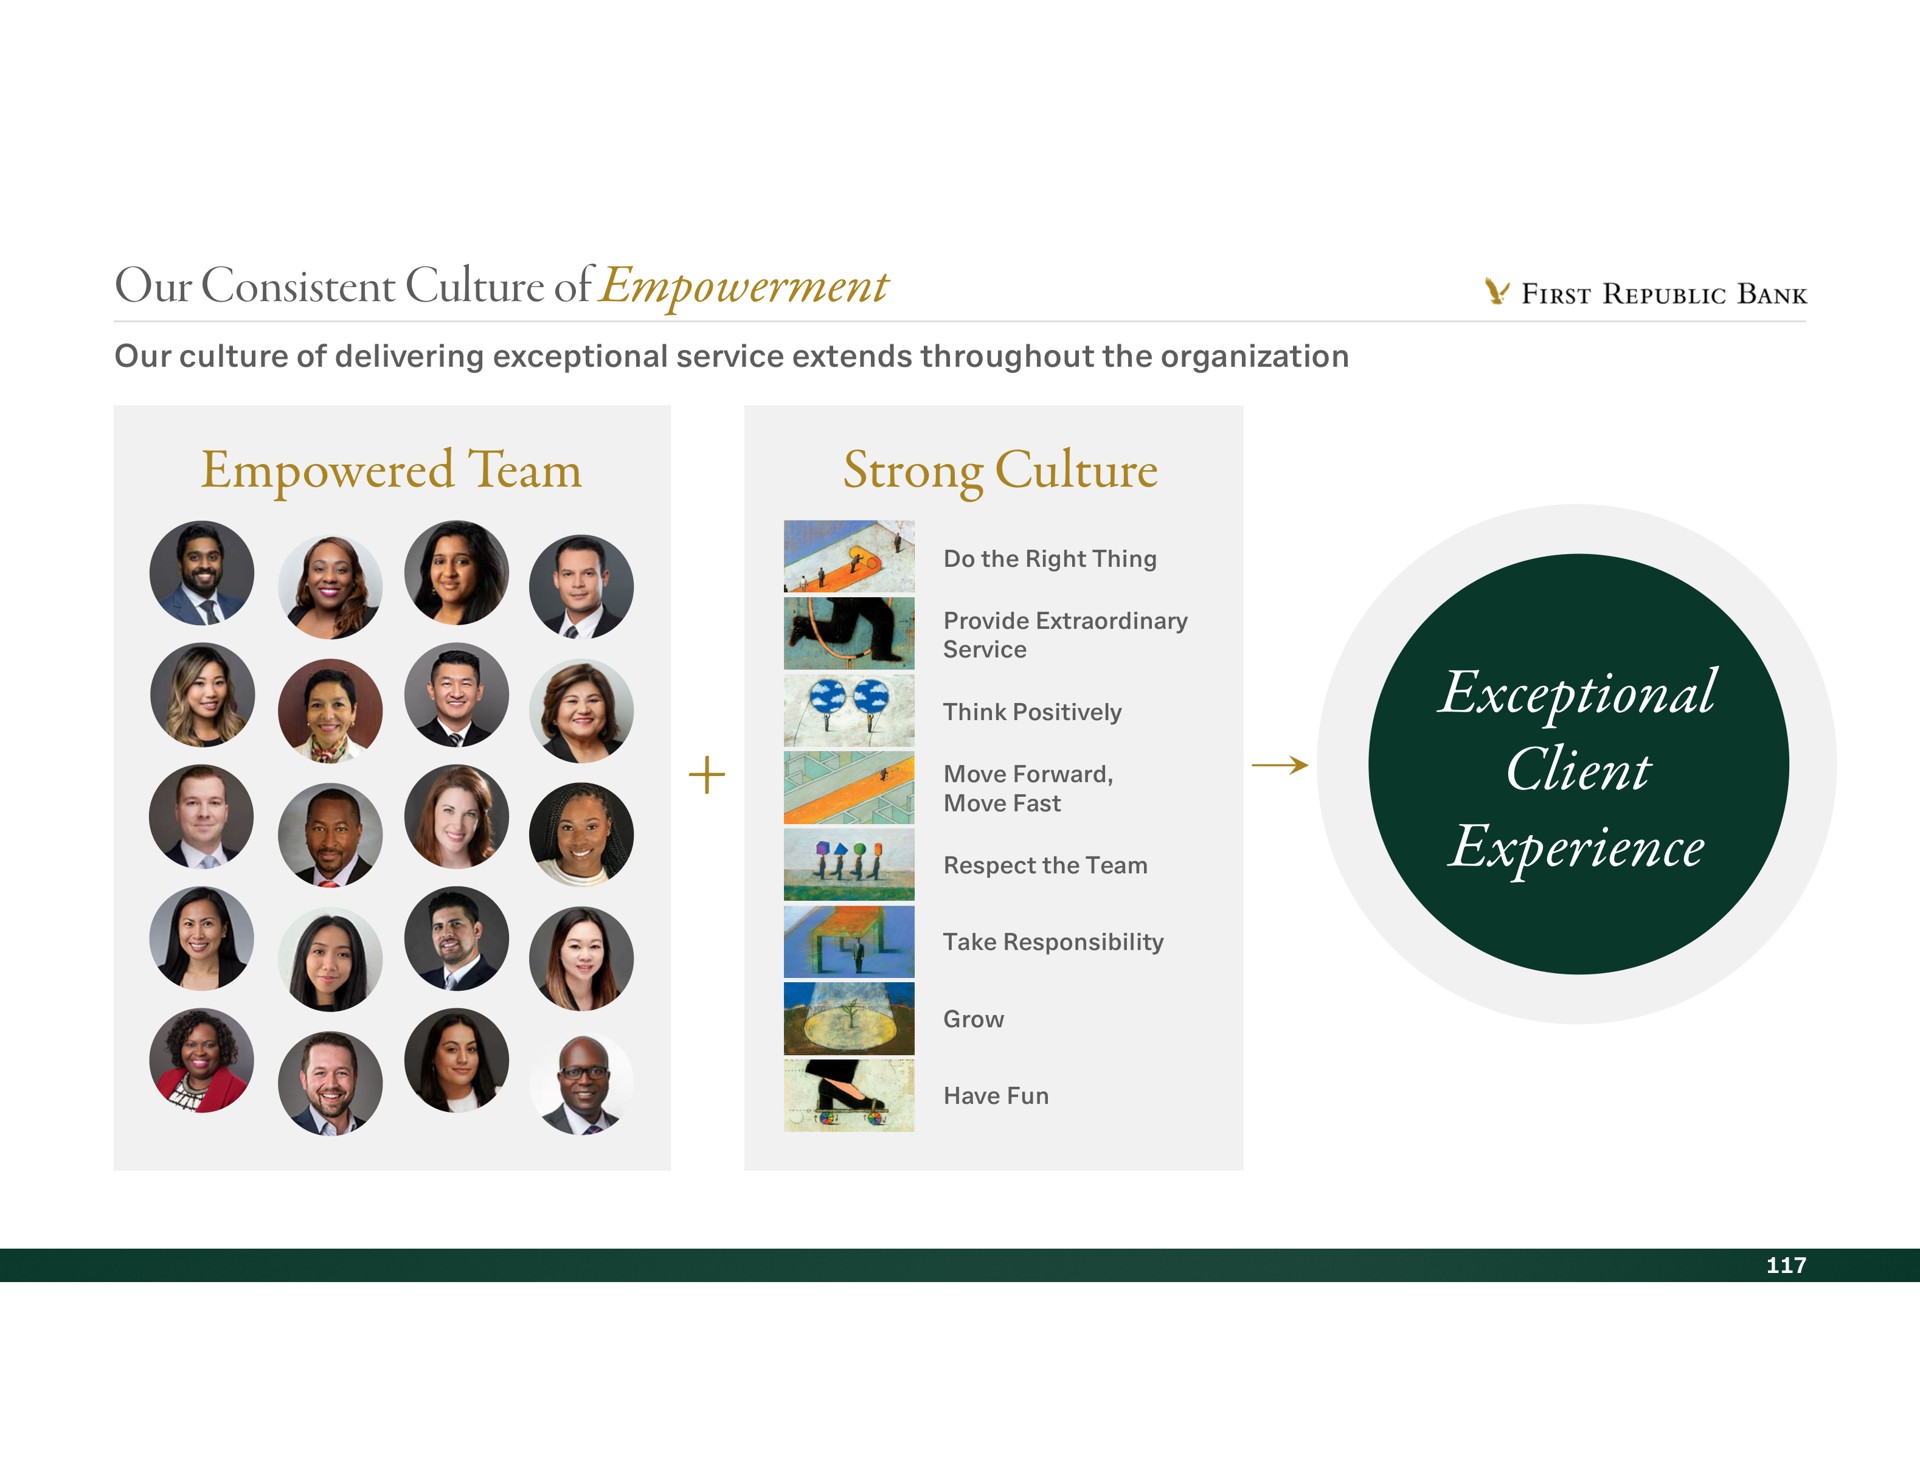 our consistent culture of empowerment empowered team strong culture exceptional client experience first republic bank think positively | First Republic Bank